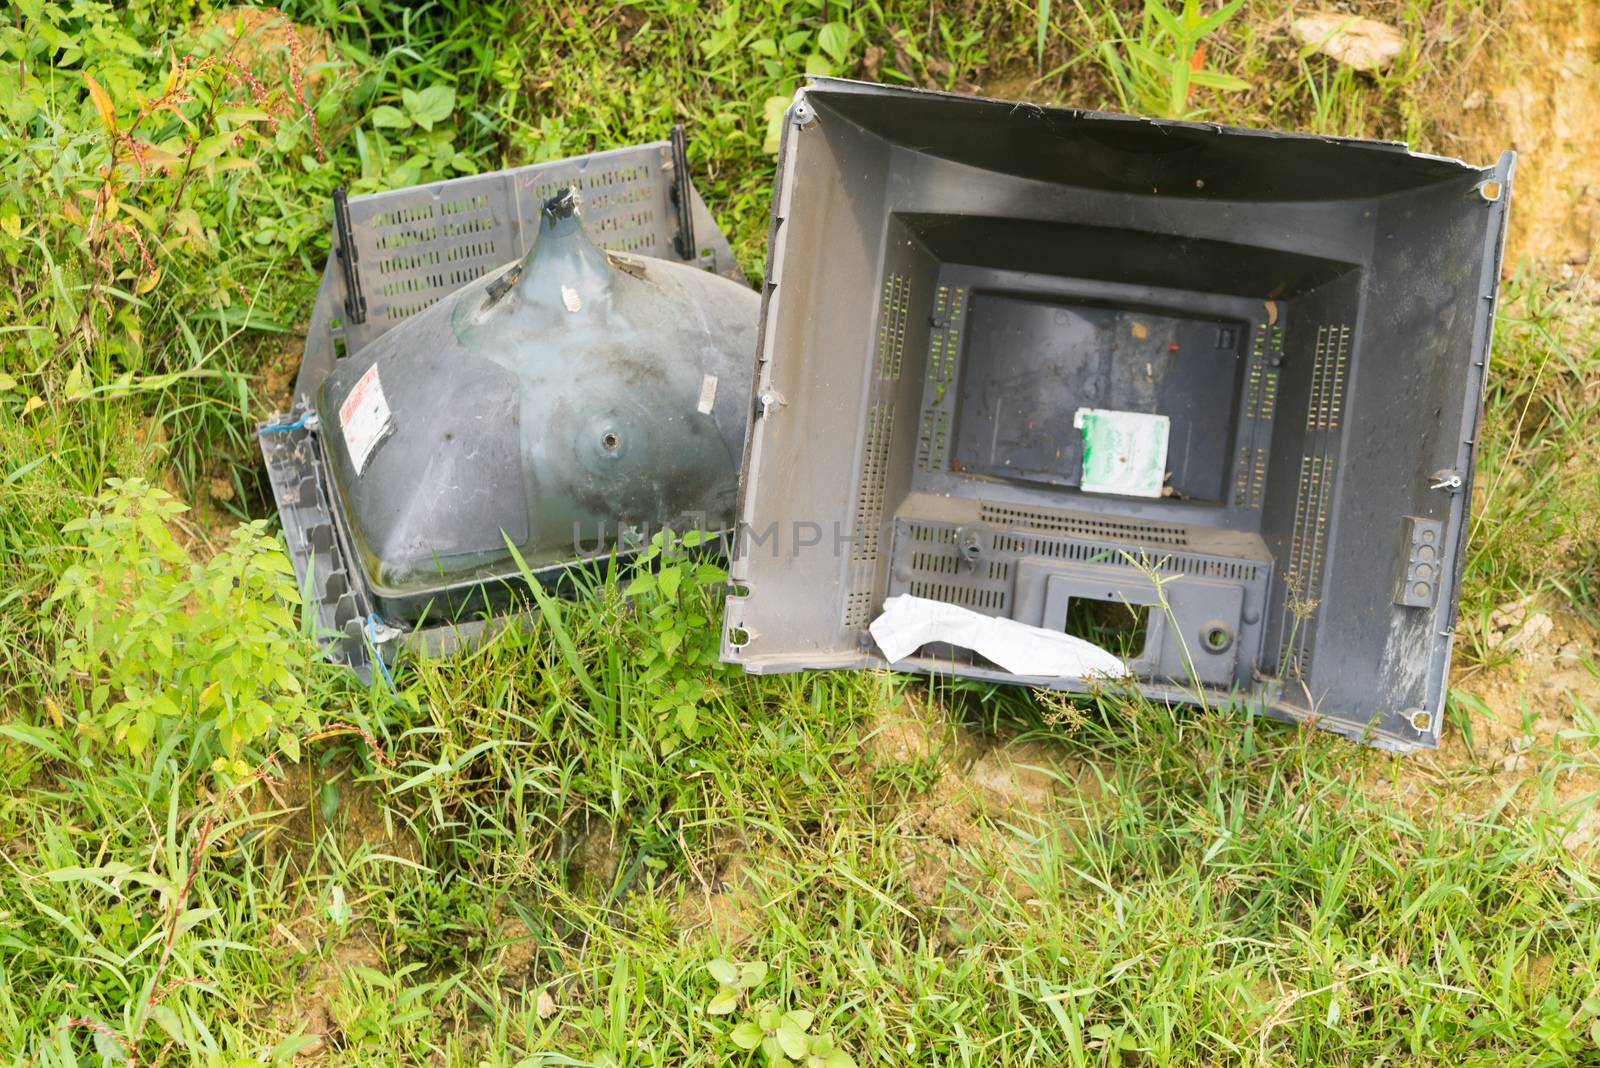 The remains Wreck of the damaged television